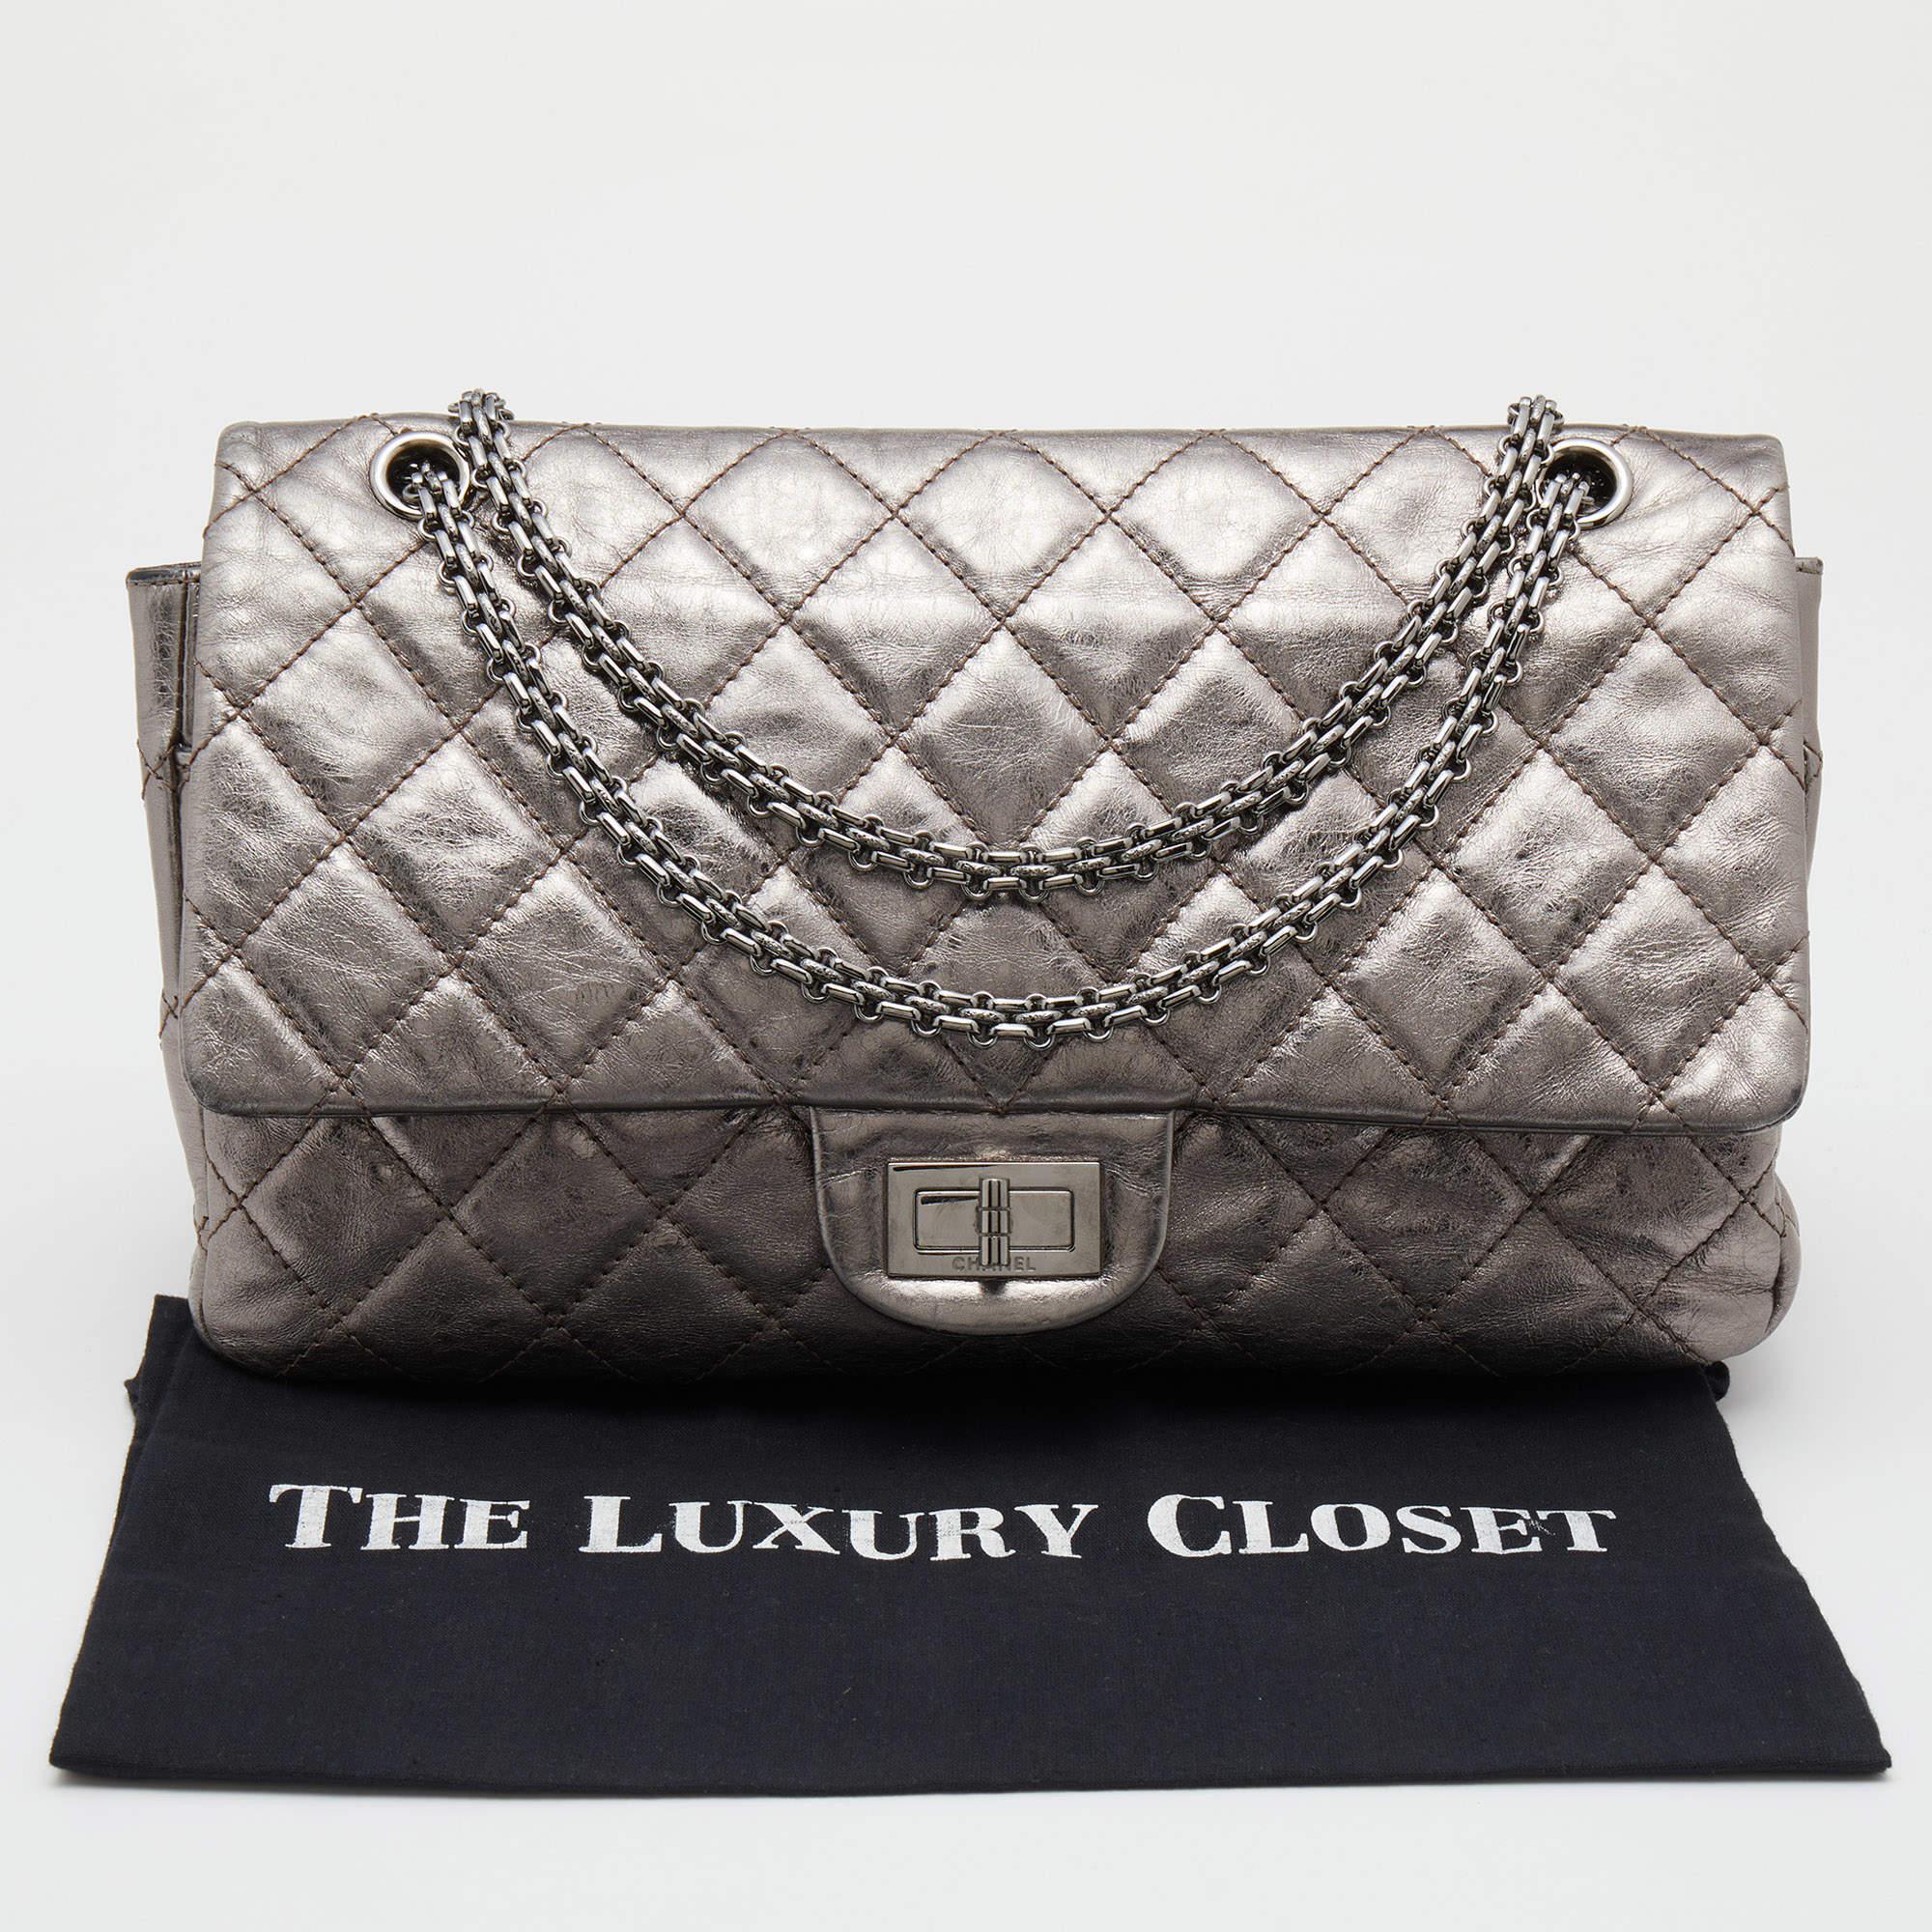 Chanel Metallic Quilted Aged Leather Reissue 2.55 Classic 227 Flap Bag 6